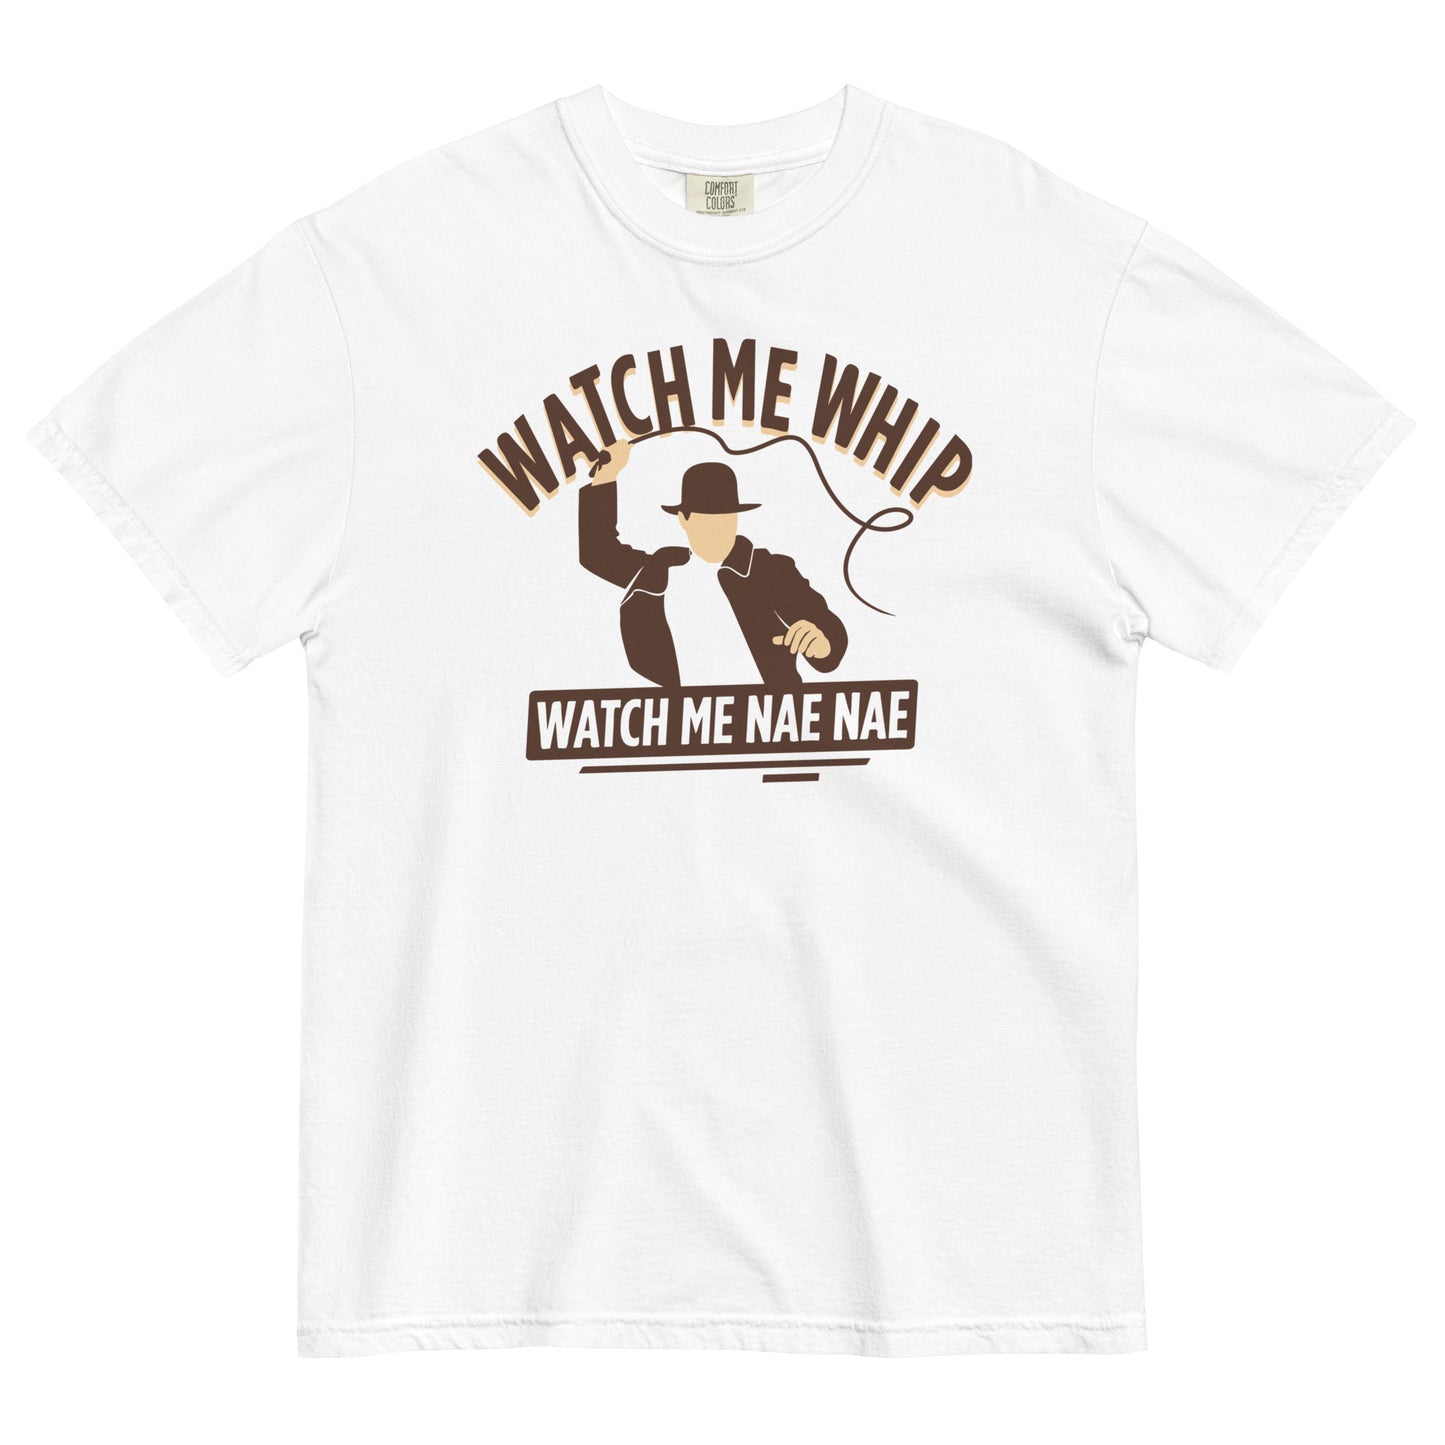 Watch Me Whip Men's Relaxed Fit Tee